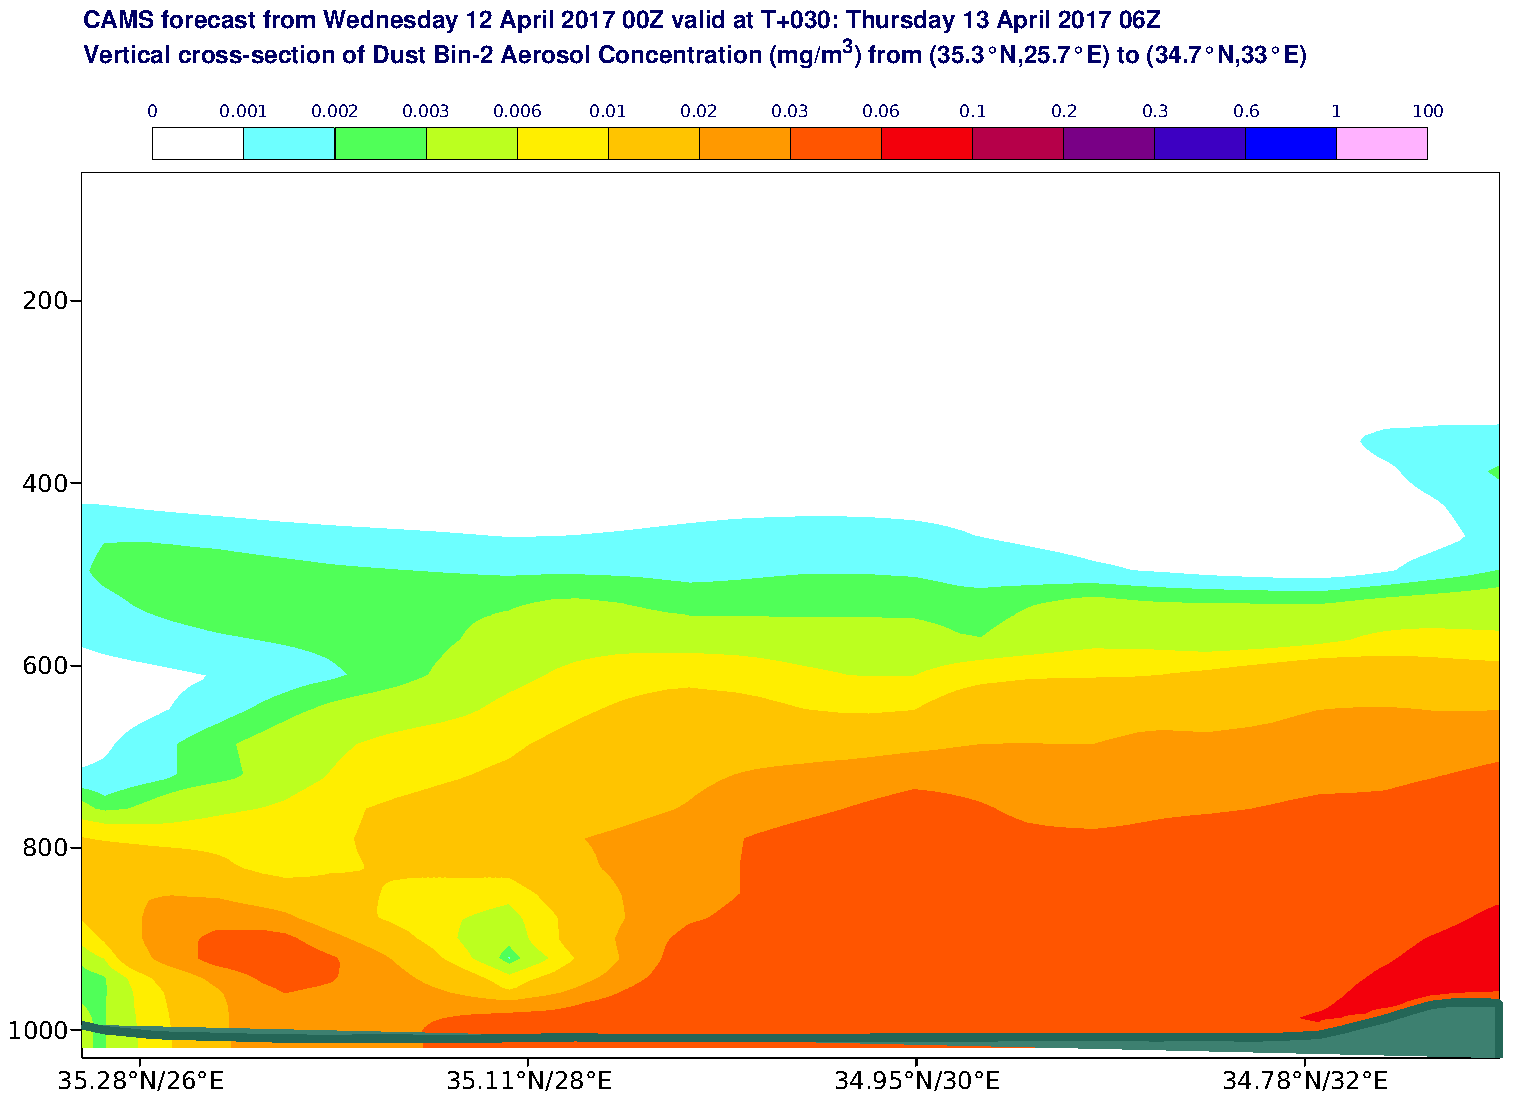 Vertical cross-section of Dust Bin-2 Aerosol Concentration (mg/m3) valid at T30 - 2017-04-13 06:00